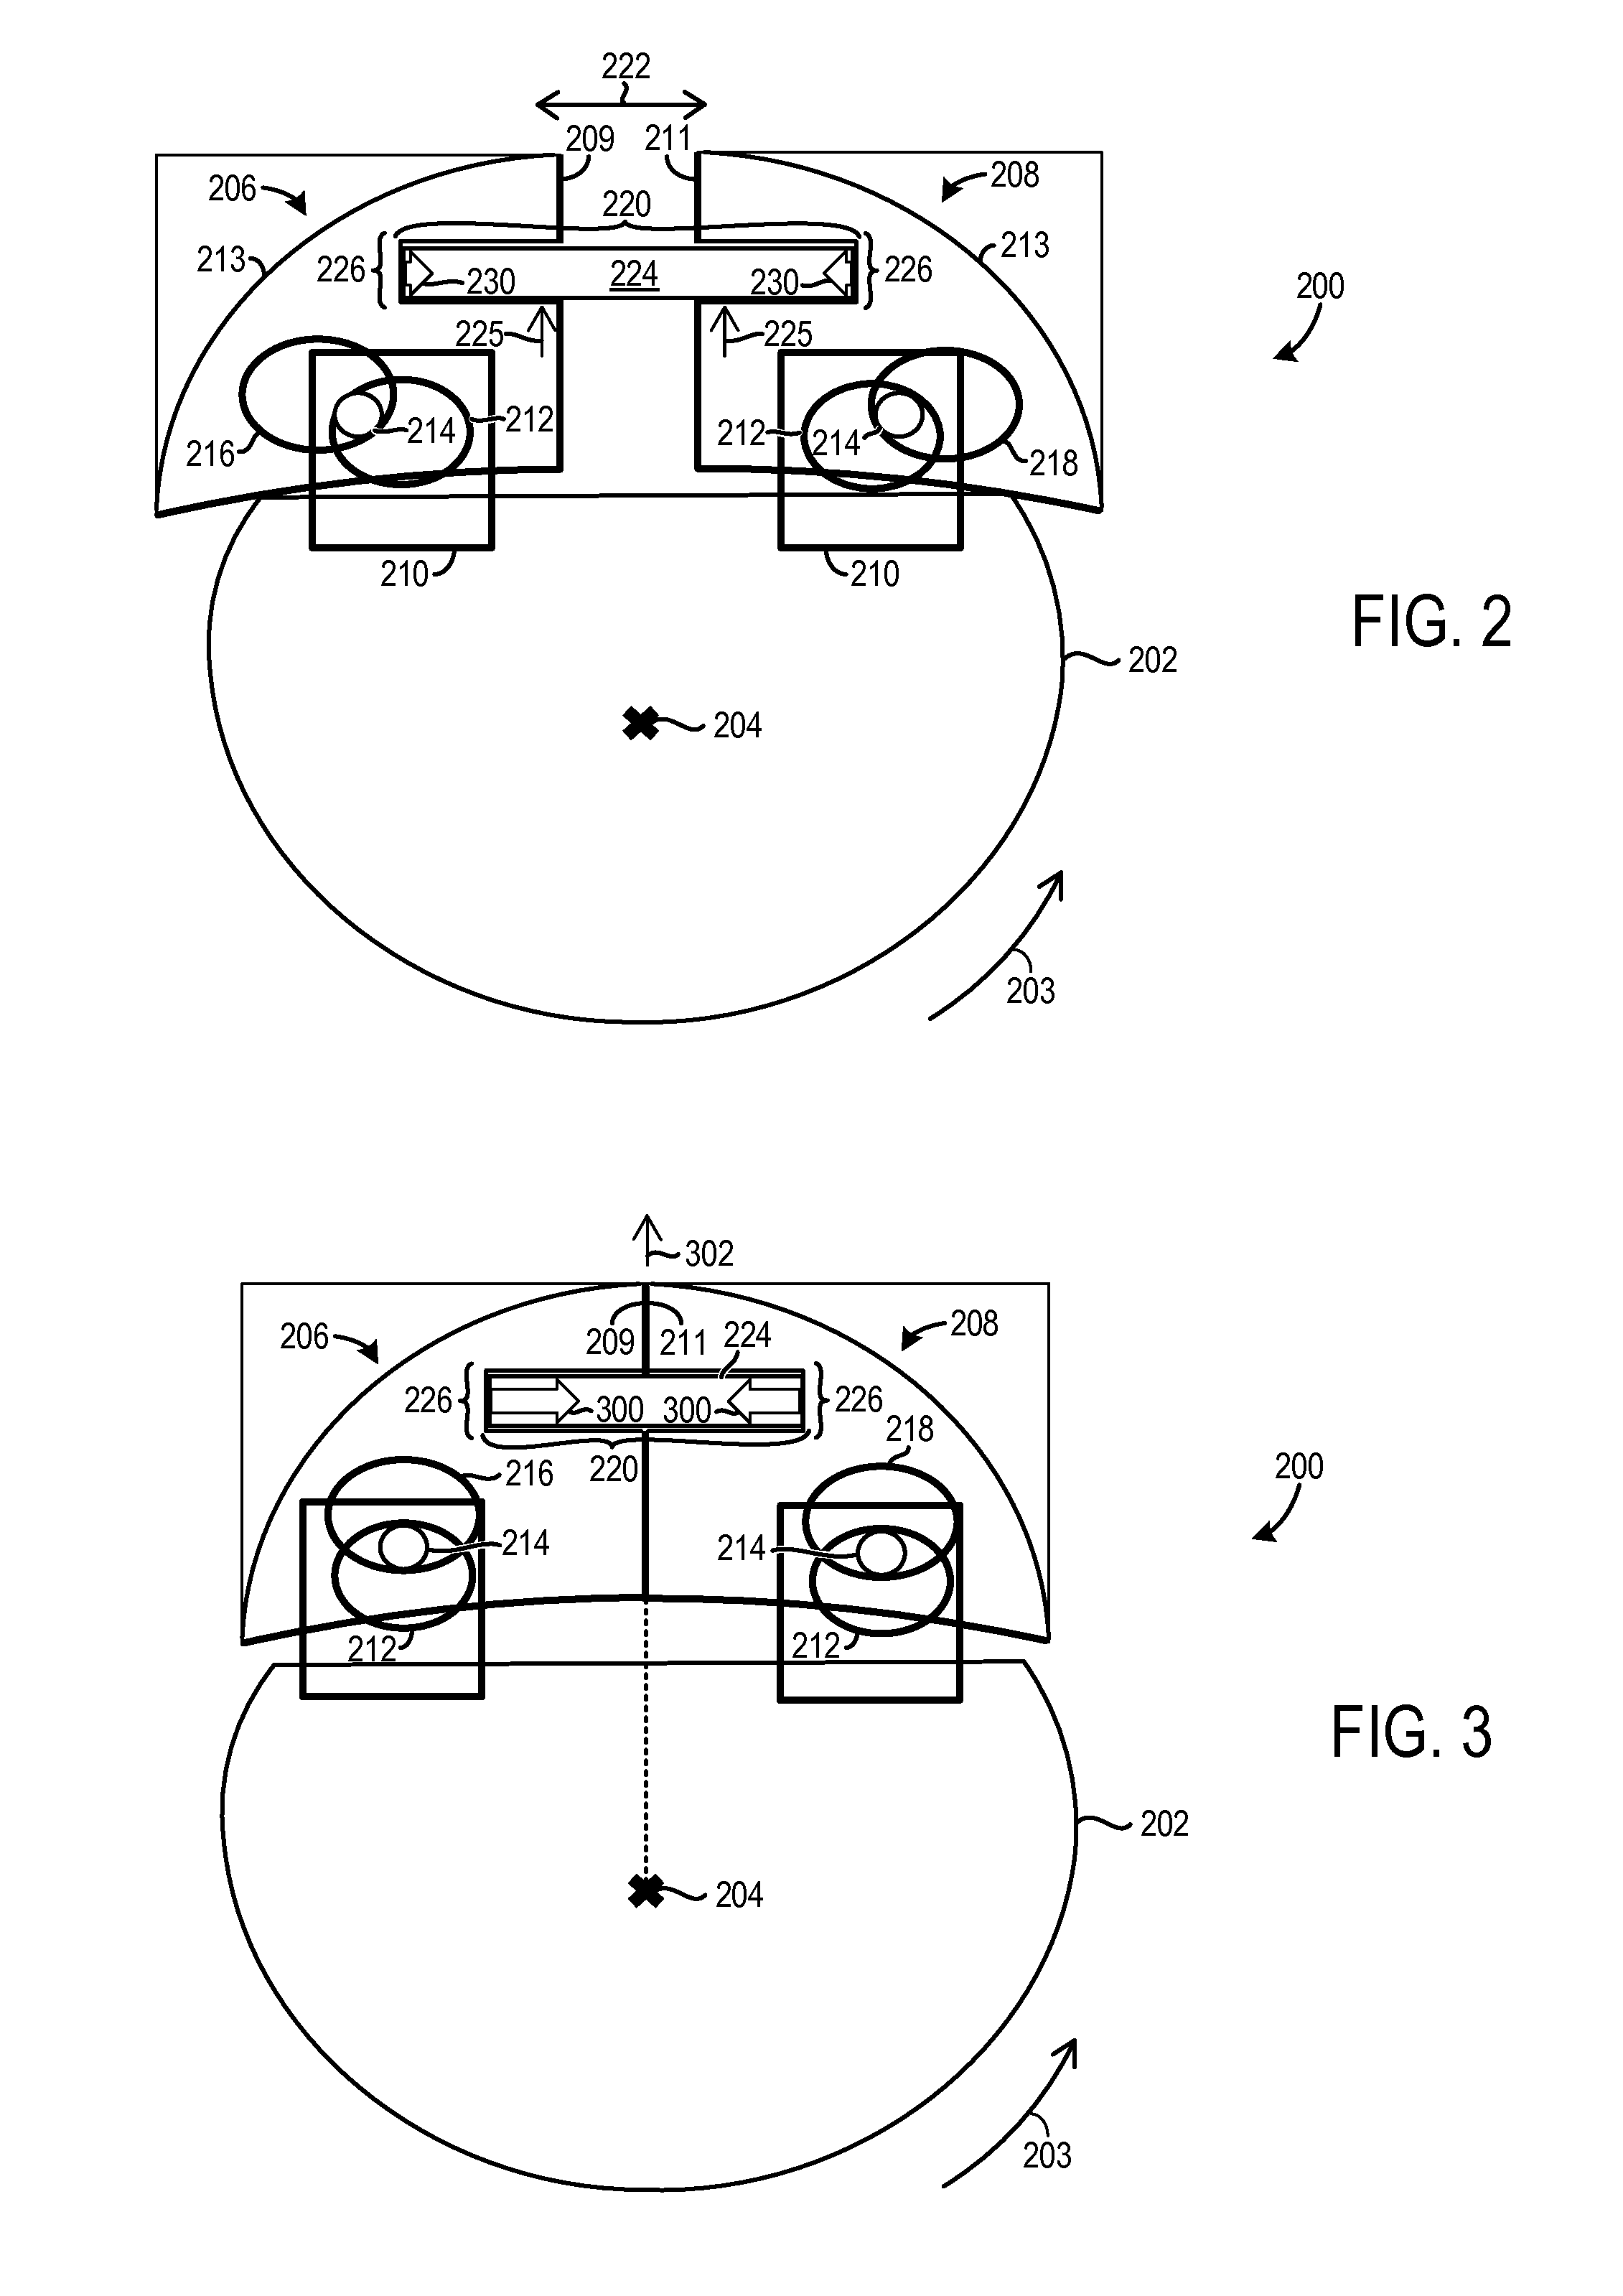 Pendulum absorber with sliding joint